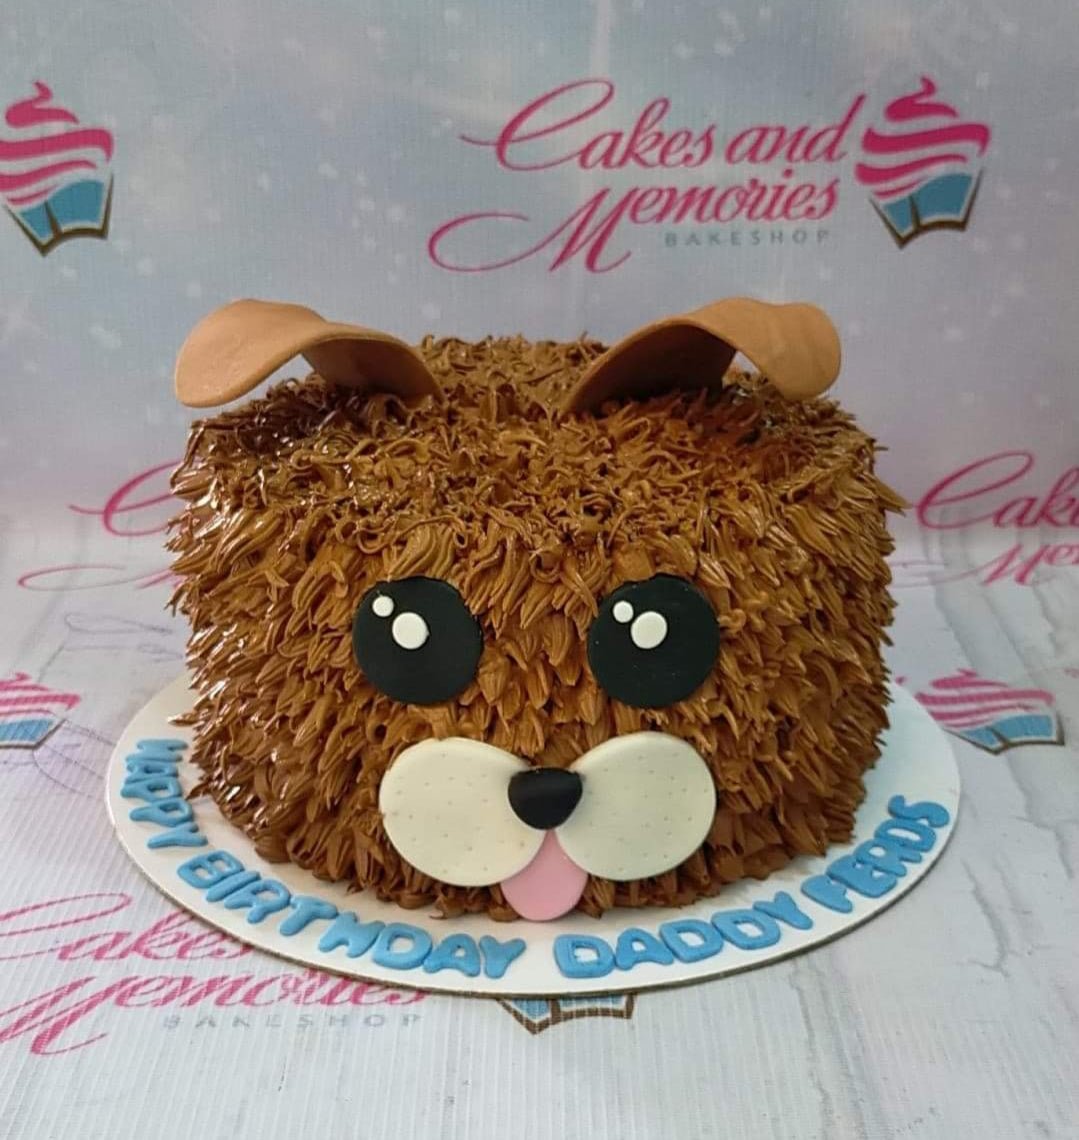 Dog Cake - 1101 – Cakes and Memories Bakeshop